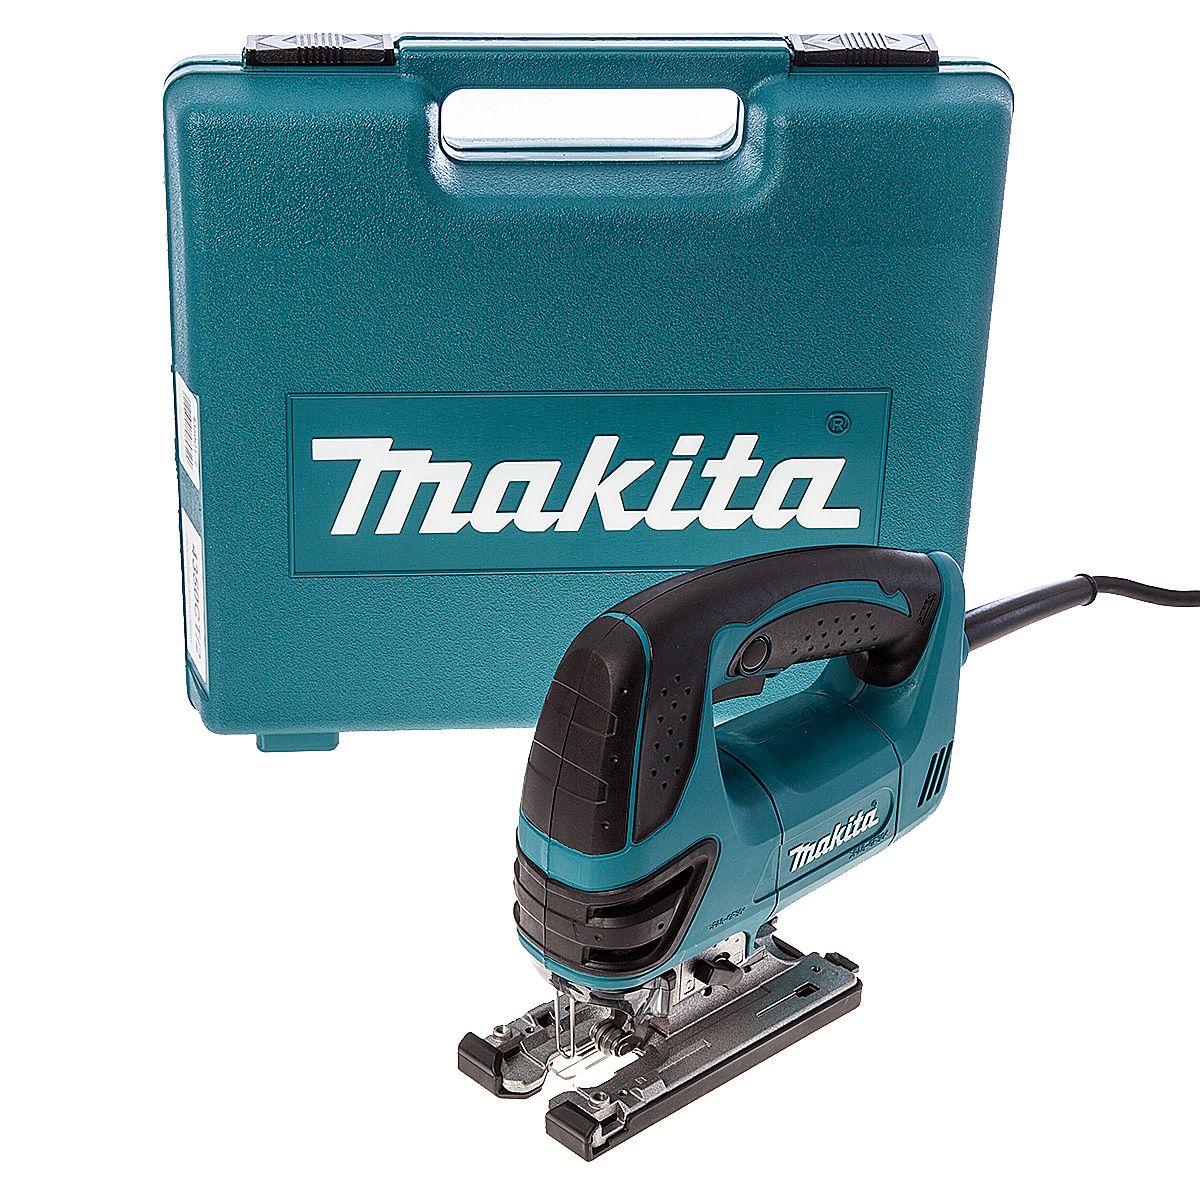 Great Condition Jigsaw Makita 4350CT 240V Jigsaw See Honest Pictures 